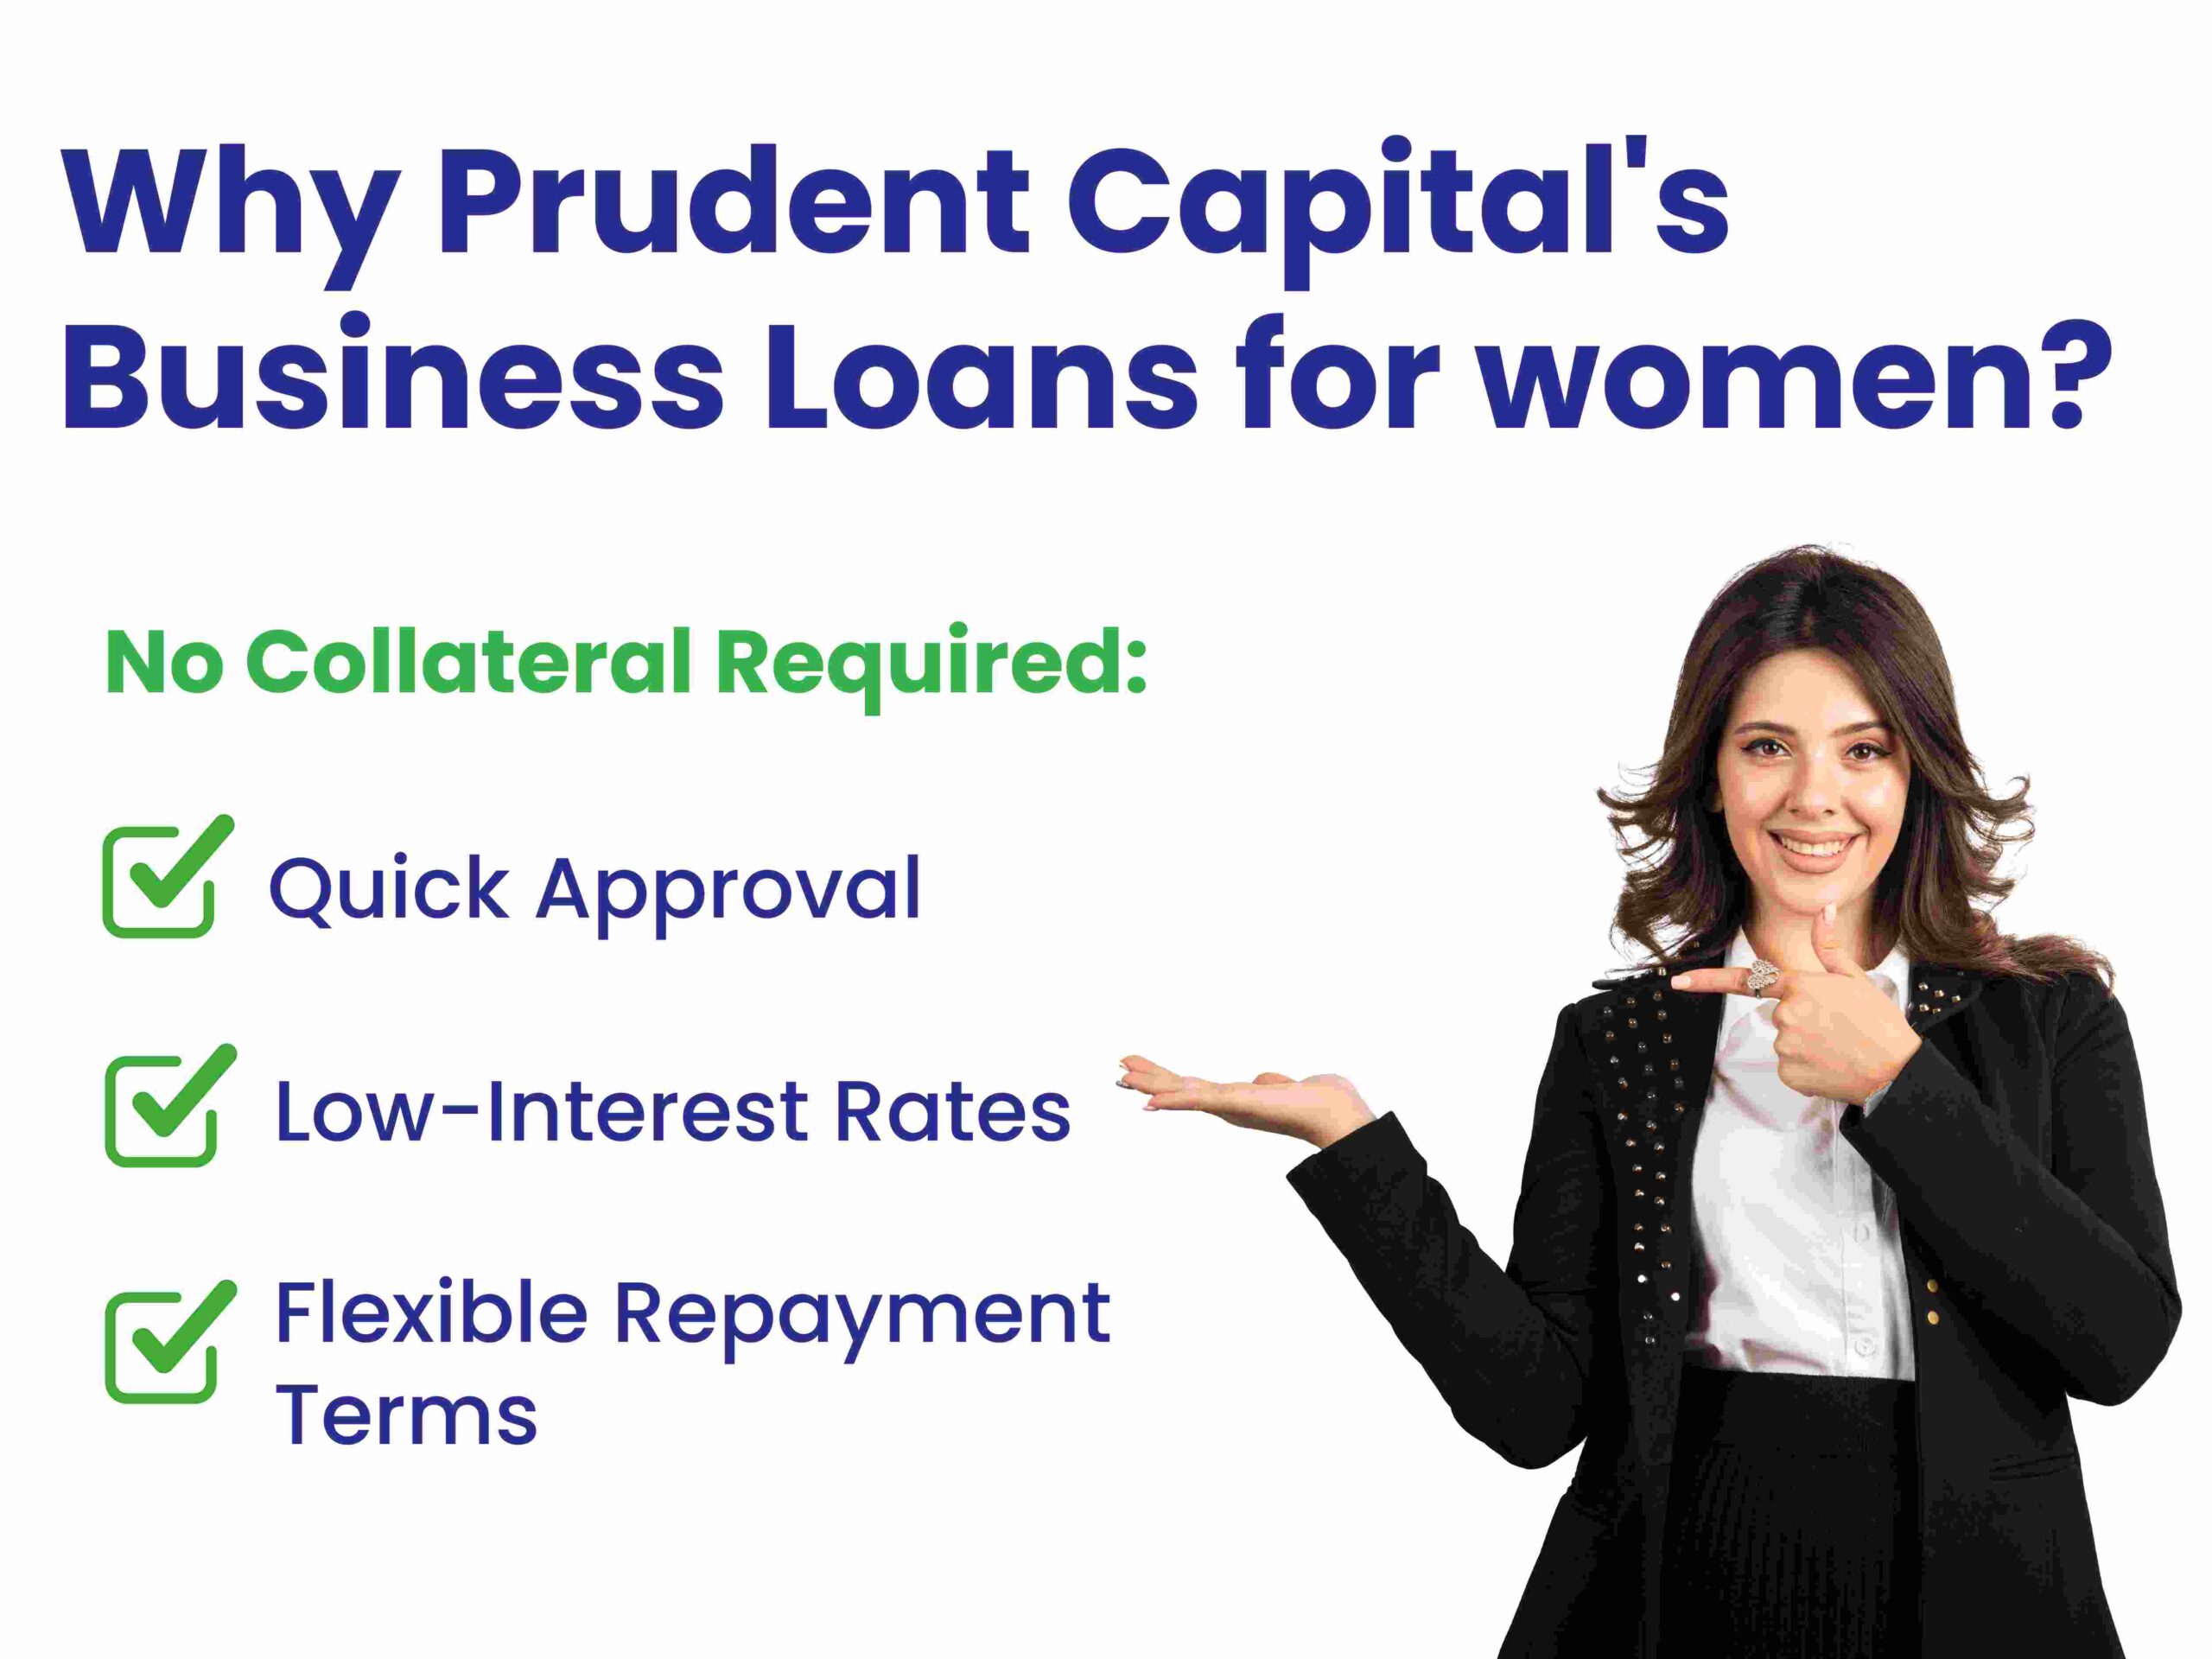 Why Prudent Capital's Business Loans for women